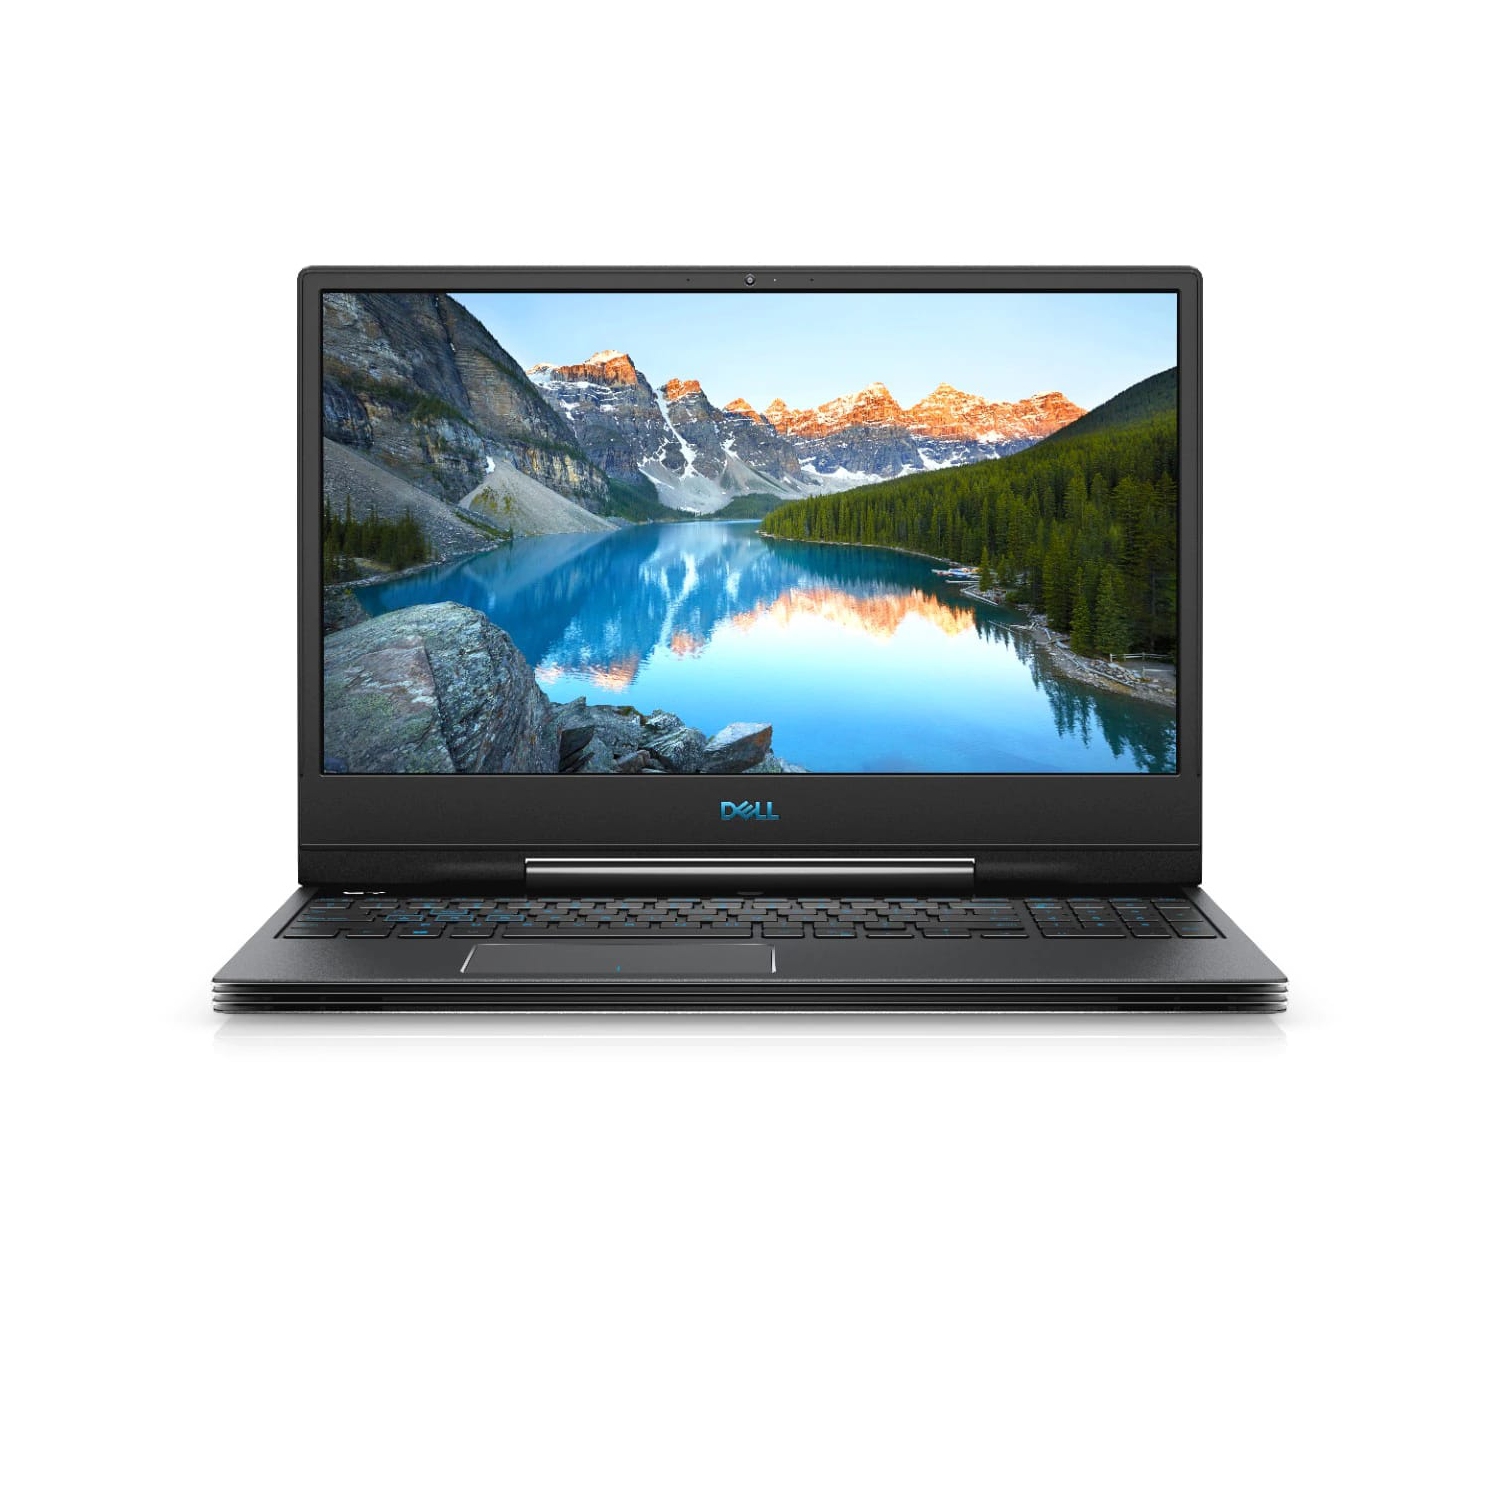 Refurbished (Excellent) - Dell G7 15 7590 Gaming Laptop (2019) | 15.6" FHD | Core i7 - 1TB HDD + 512GB SSD - 16GB RAM - RTX 2070 | 6 Cores @ 4.1 GHz Certified Refurbished